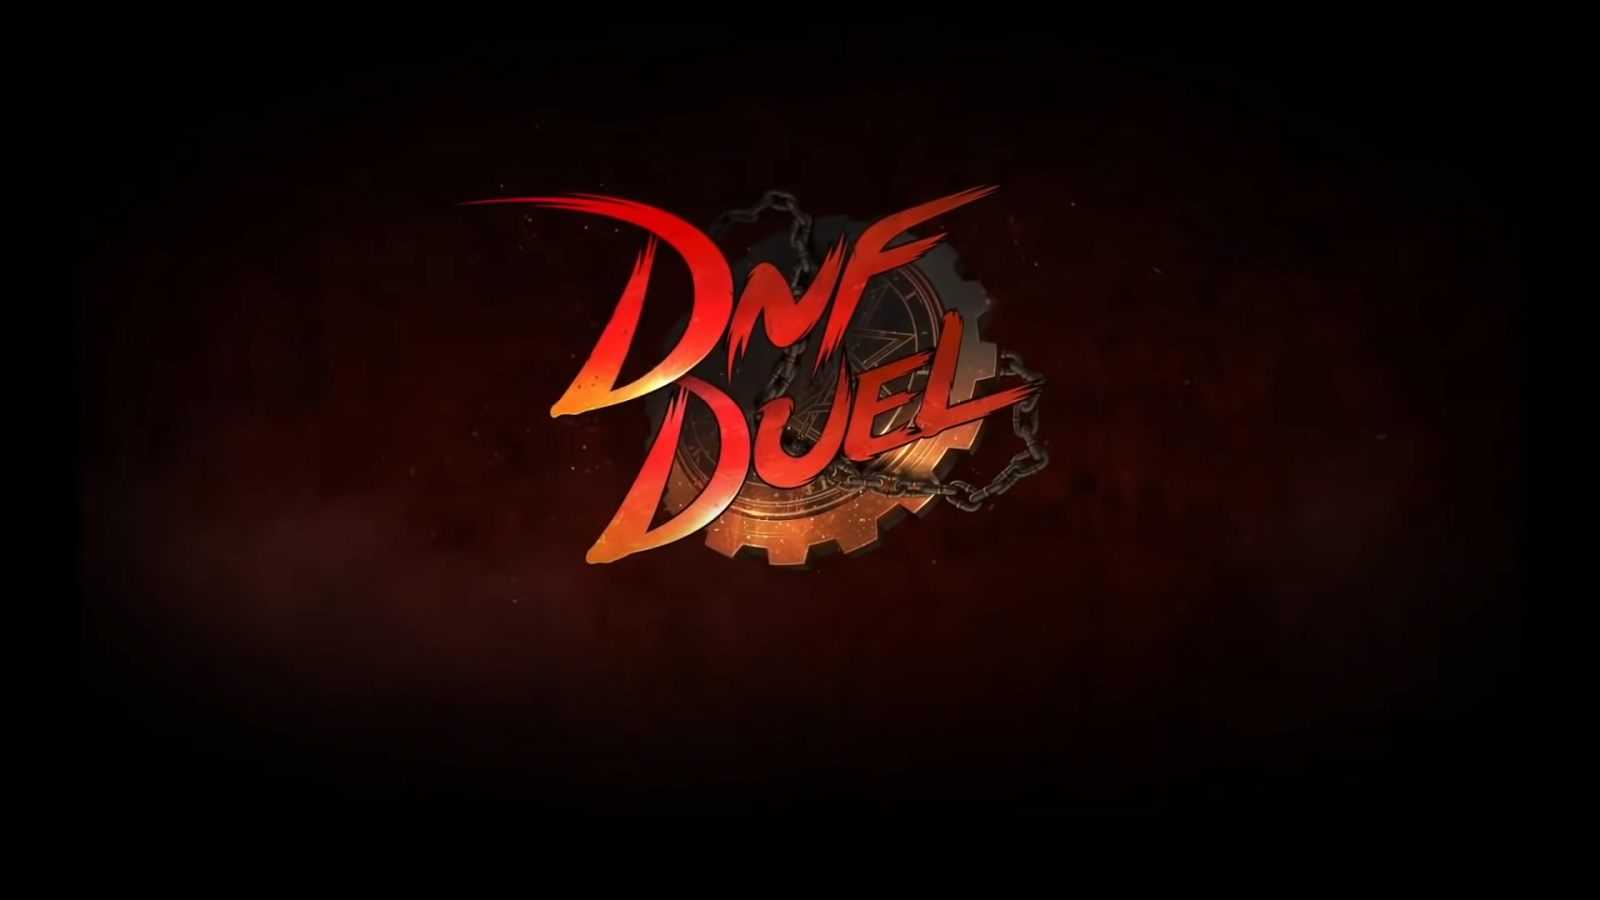 dnf duel release download free